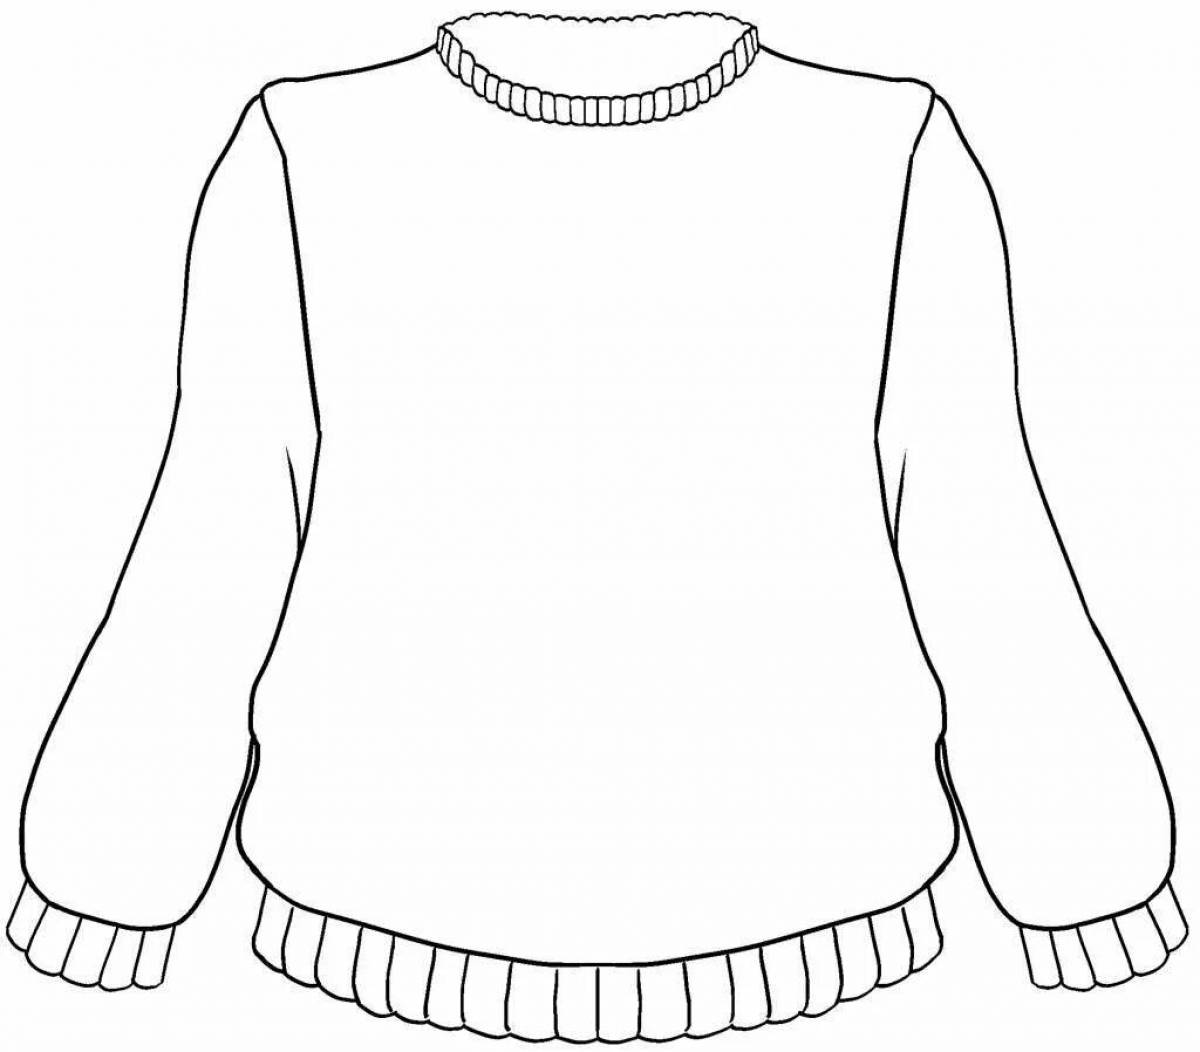 Outstanding sweater coloring page for 4-5 year olds